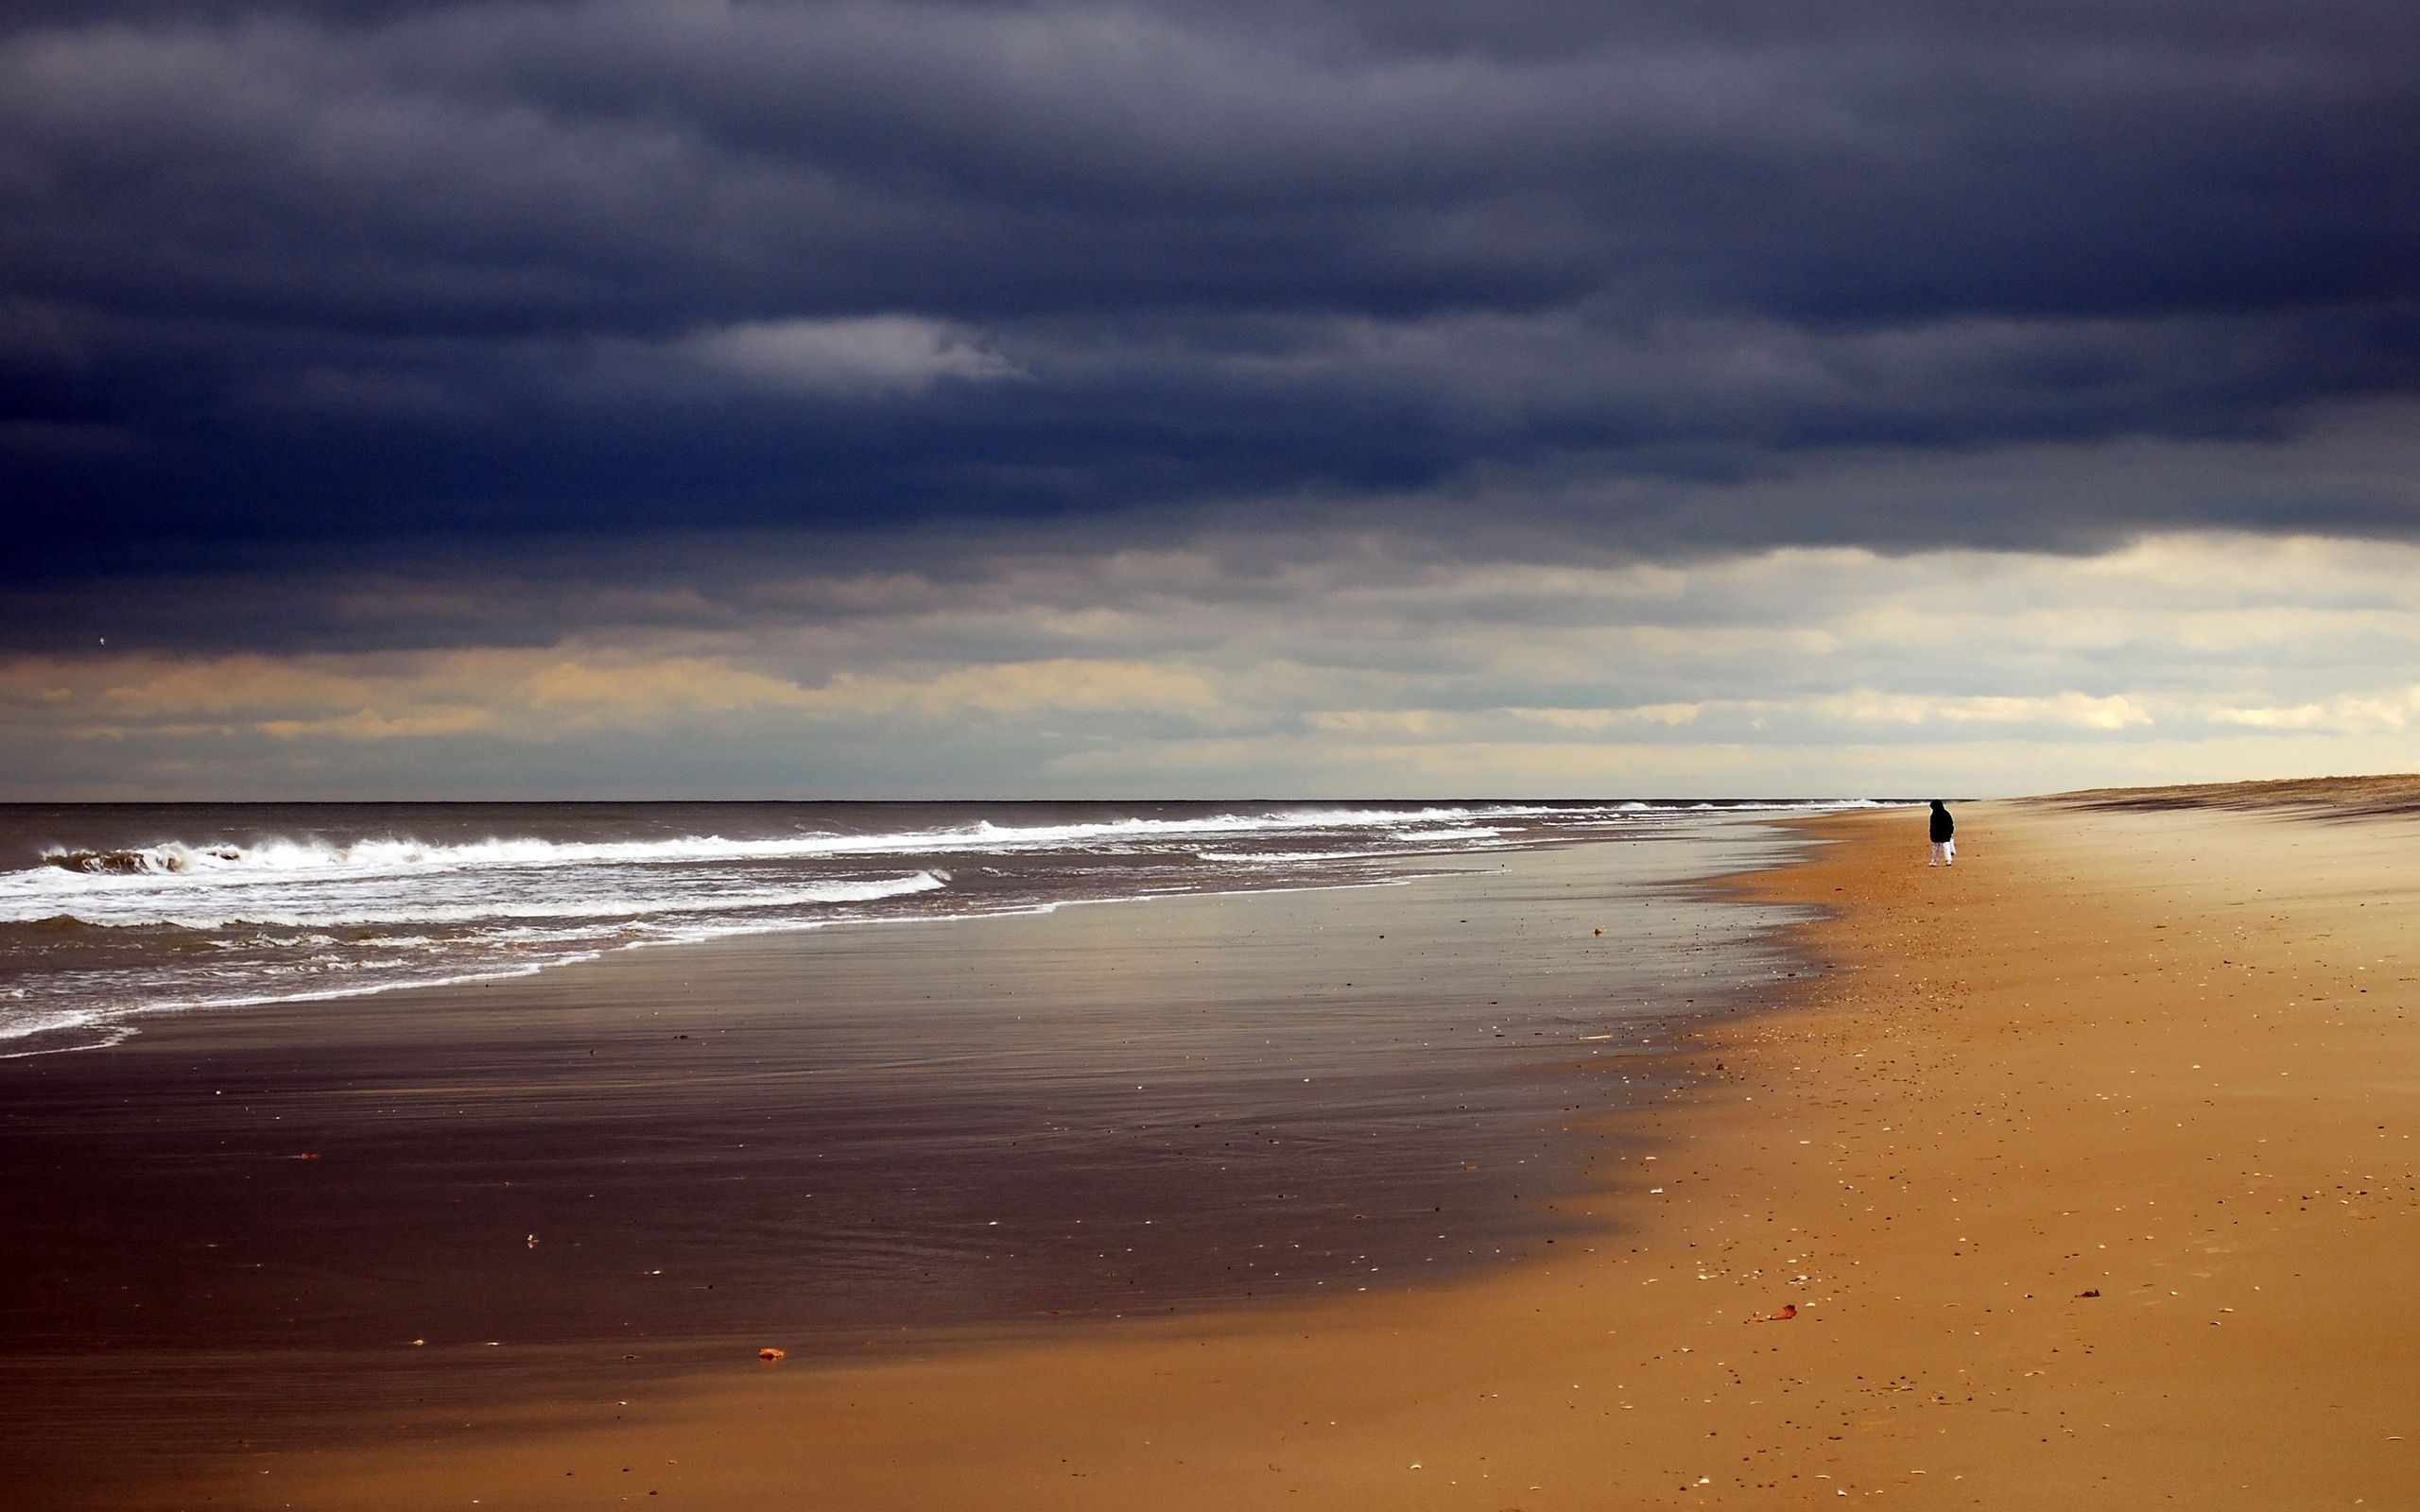 mainly cloudy, nature, beach, sand, shore, bank, ocean, human, person, overcast, loneliness, emptiness, void